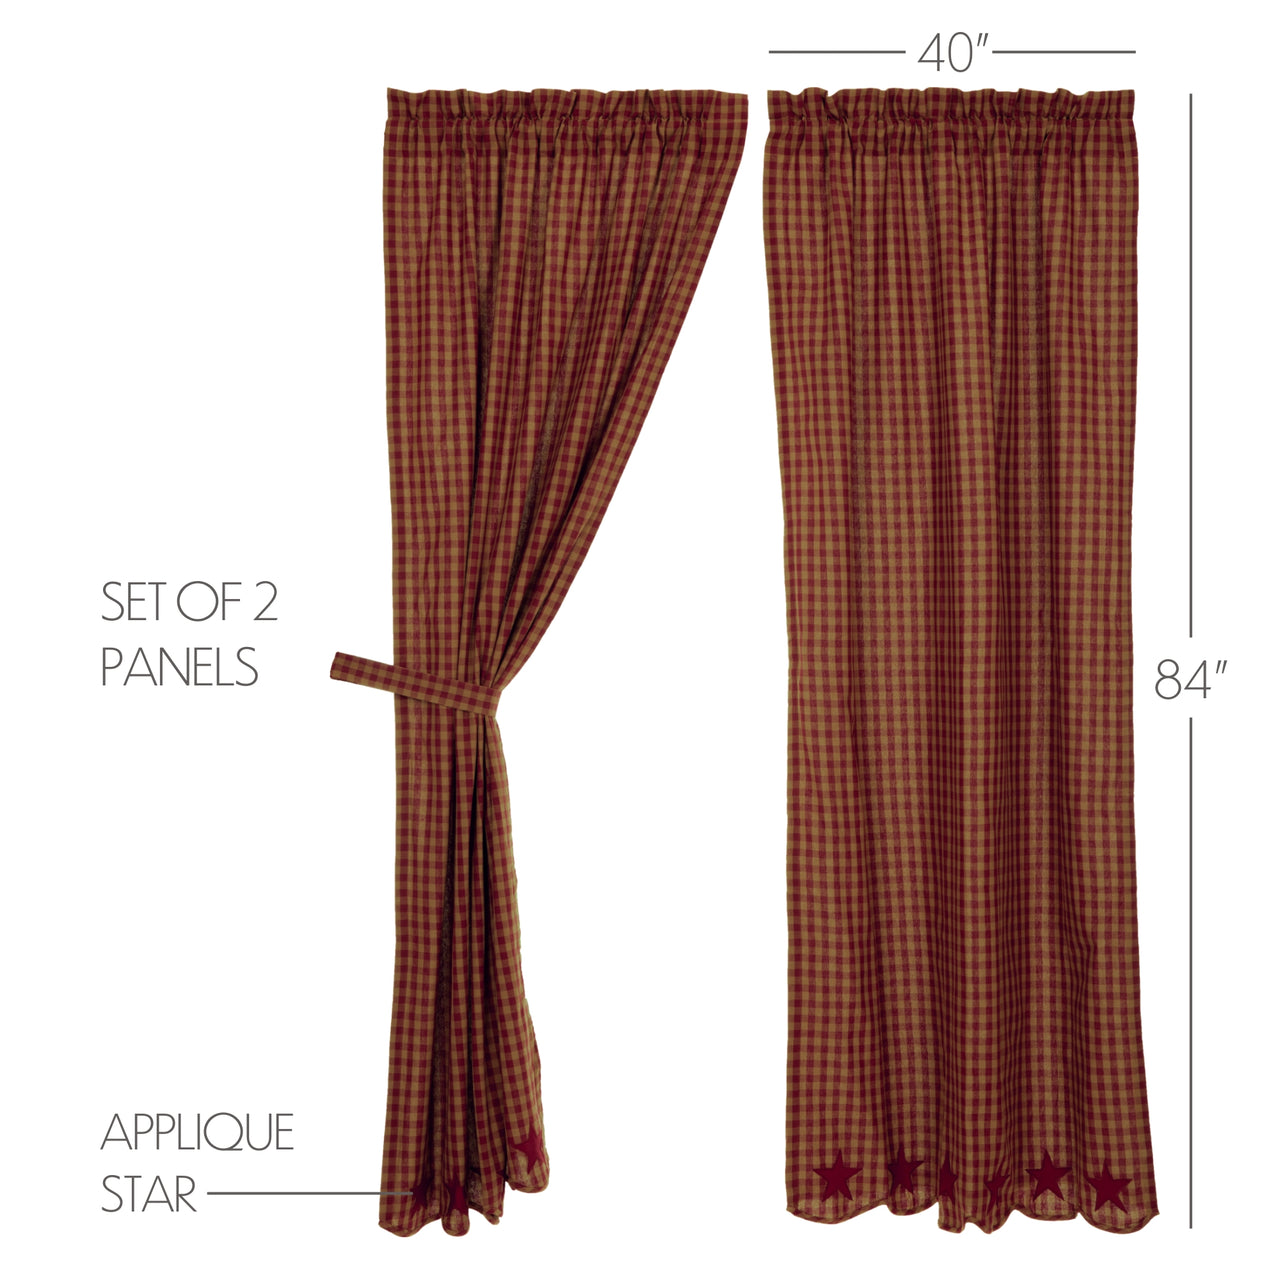 Burgundy Star Scalloped Panel Country Curtain Set of 2 84"x40"